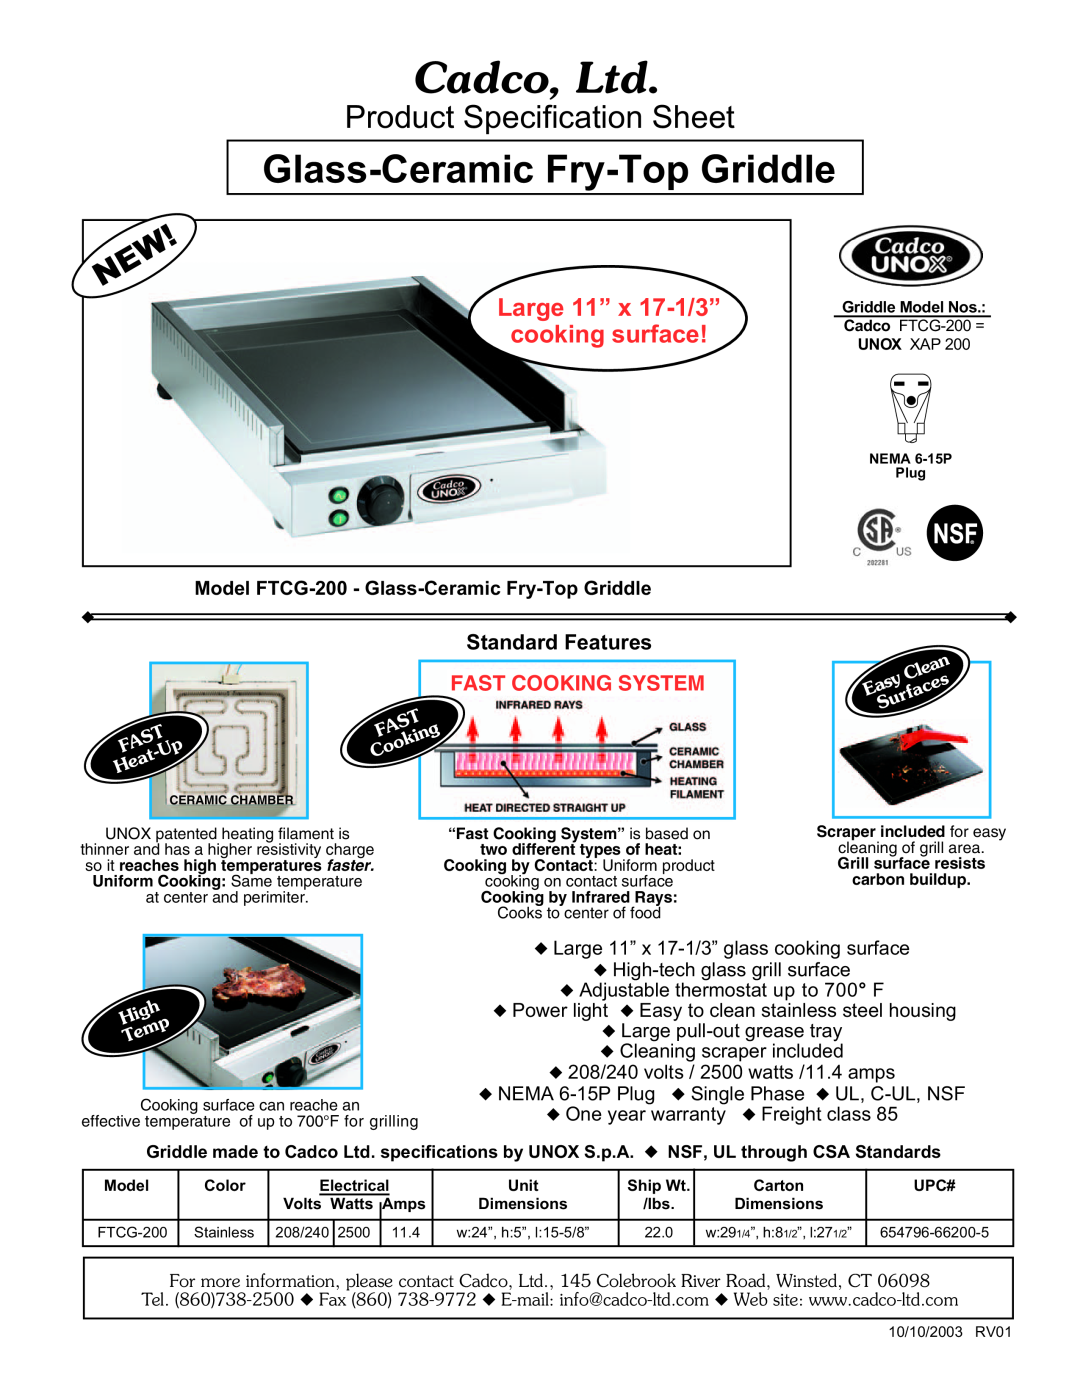 Cadco FTCG-200 specifications Glass-Ceramic Fry-TopGriddle, Product Specification Sheet, Large 11” x 17-1/3”, FAST-Up Heat 